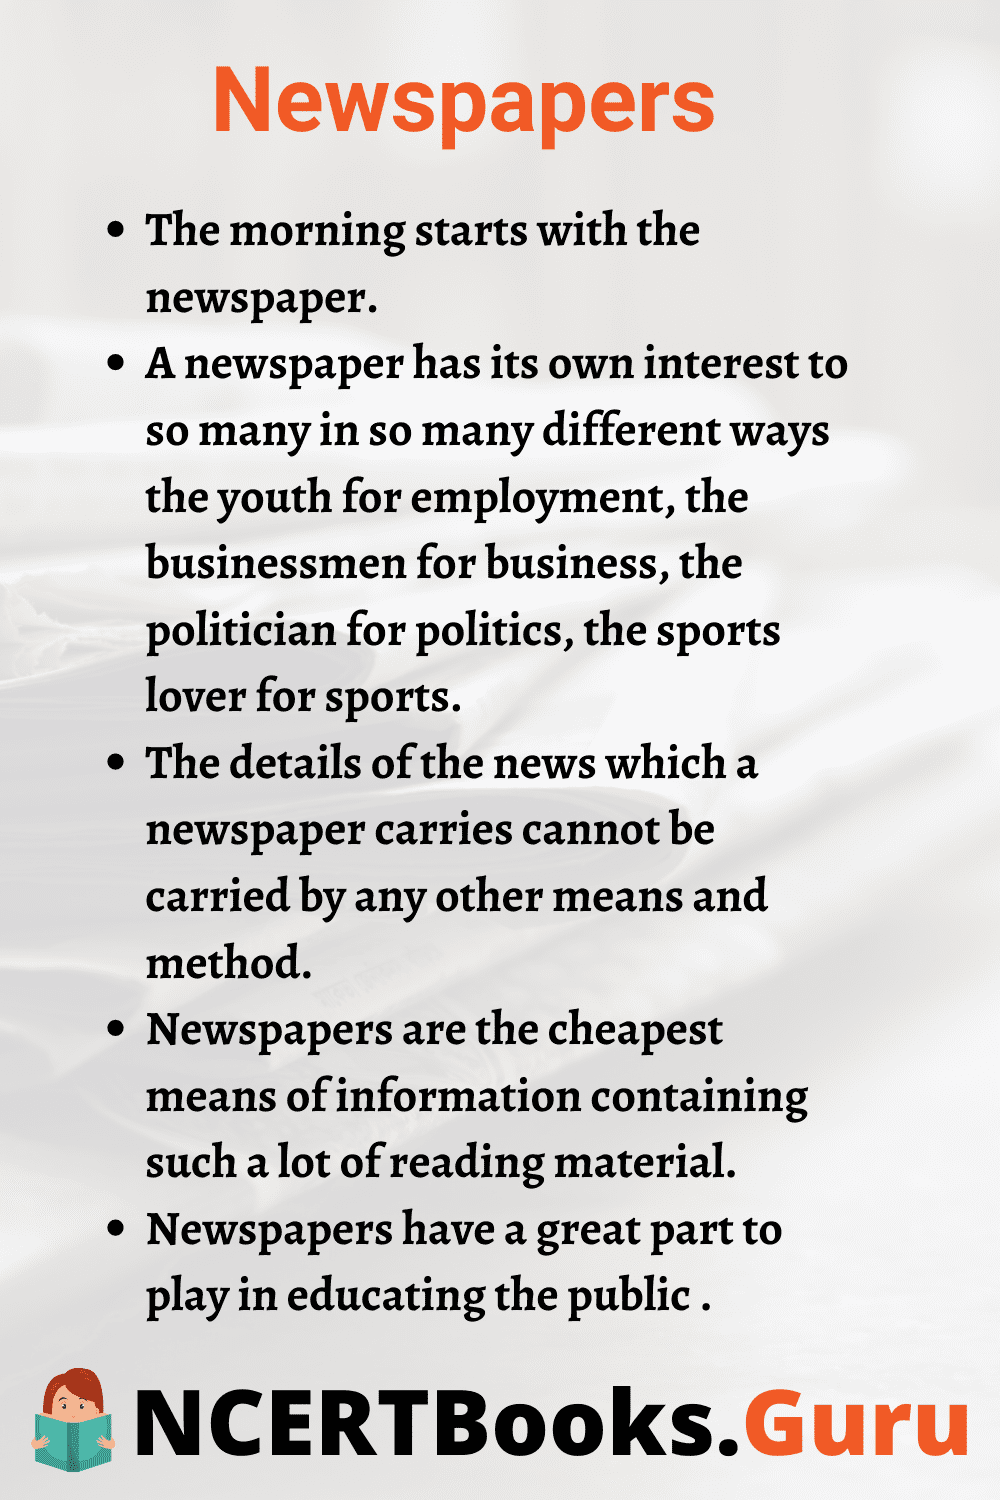 essay on newspaper and uses